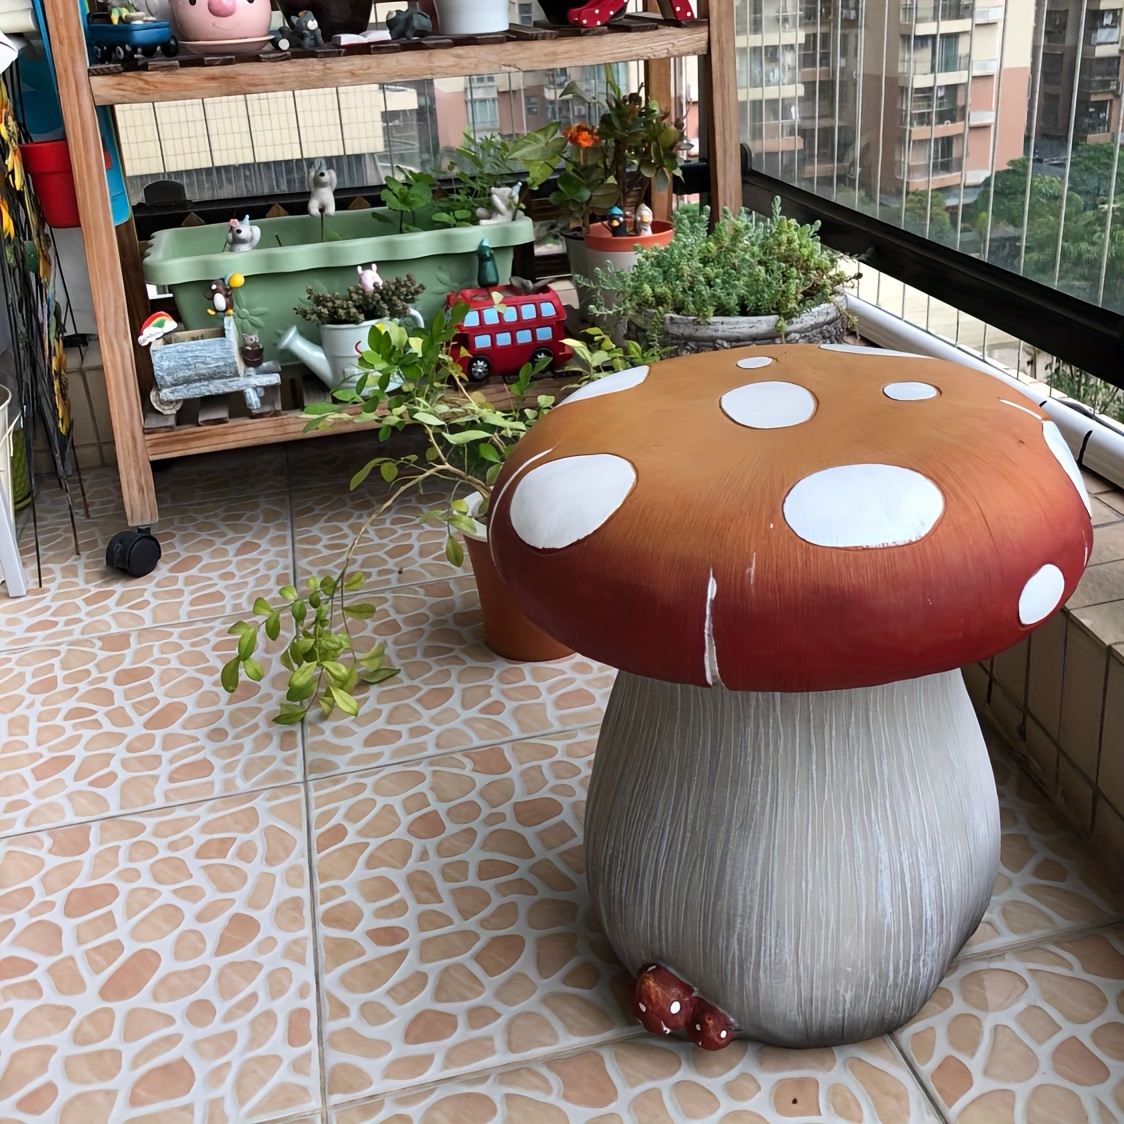 

1pc Mushroom Garden Stool, Resin Outdoor Garden Decor, Whimsical Orange And White Accent Piece For Lawn And Patio